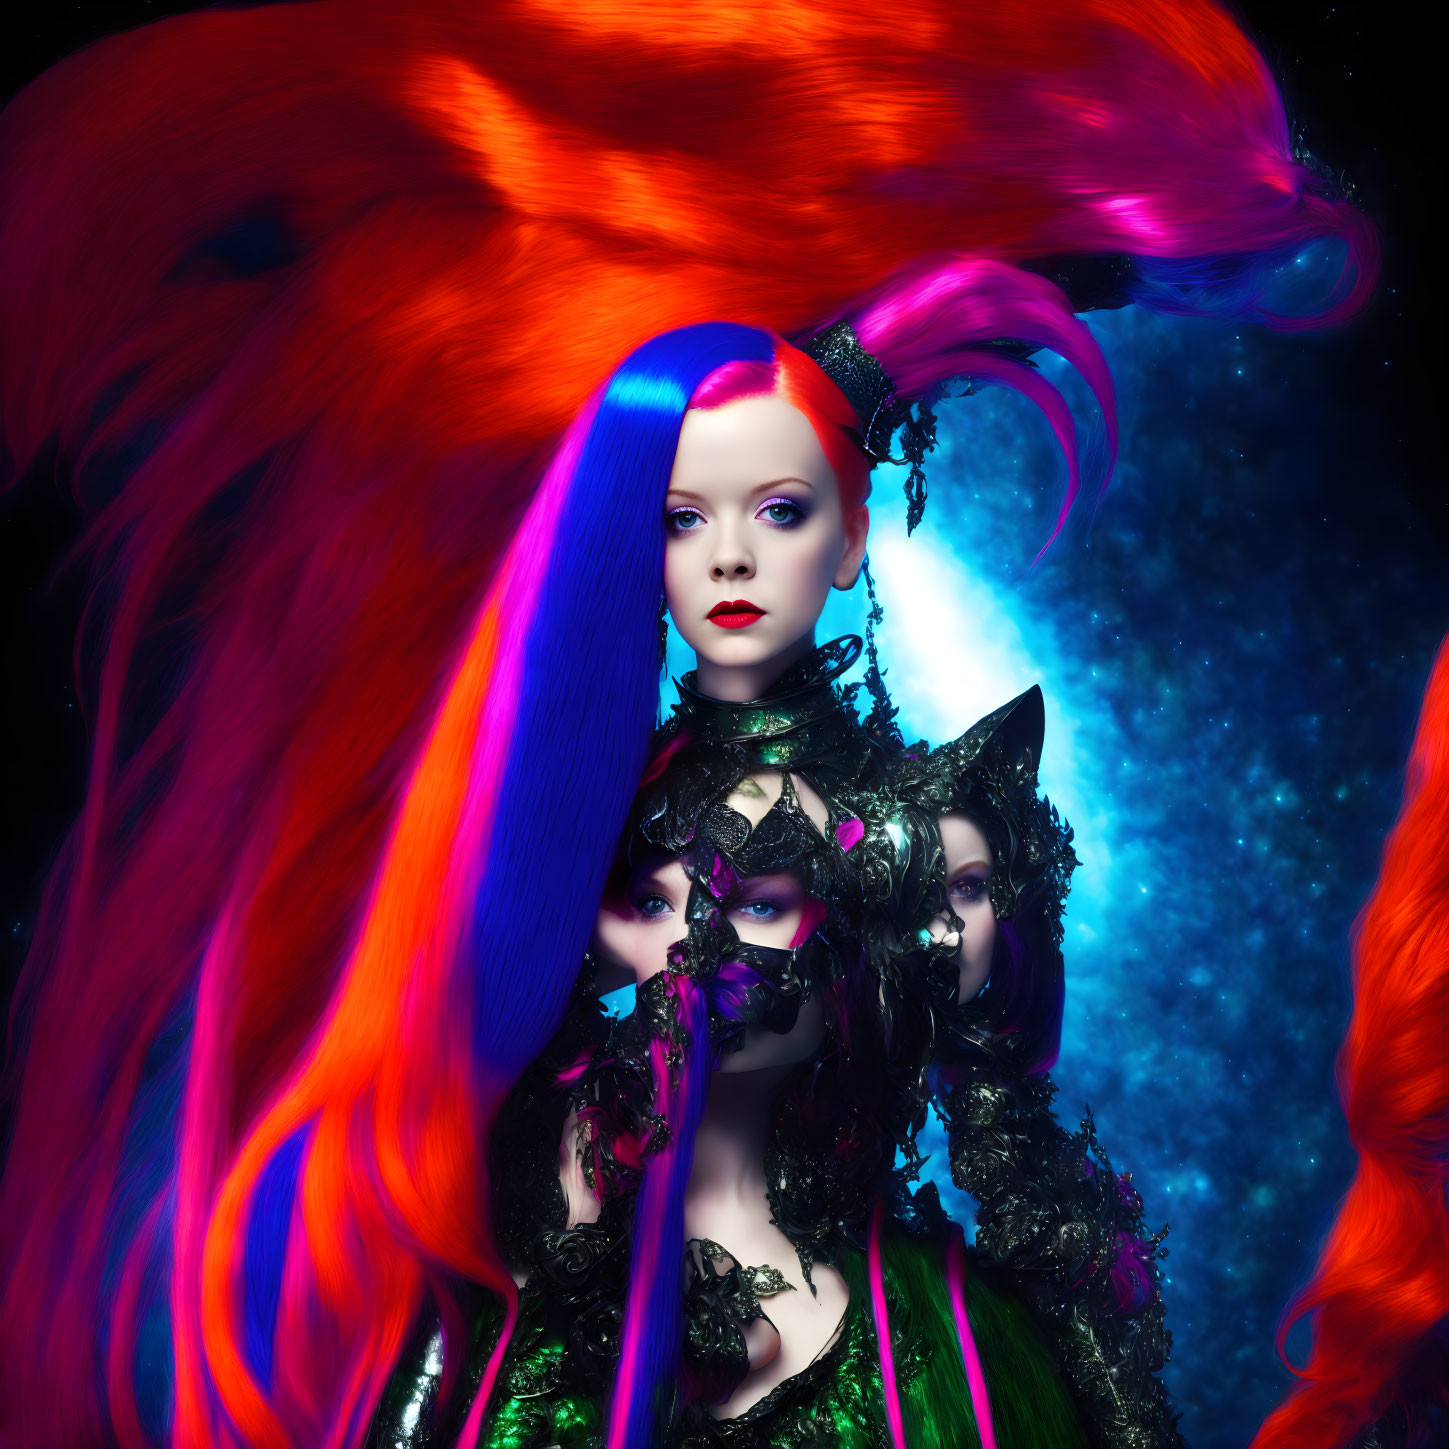 Colorful portrait of a woman with red and purple hair, masked figures, and cosmic background.